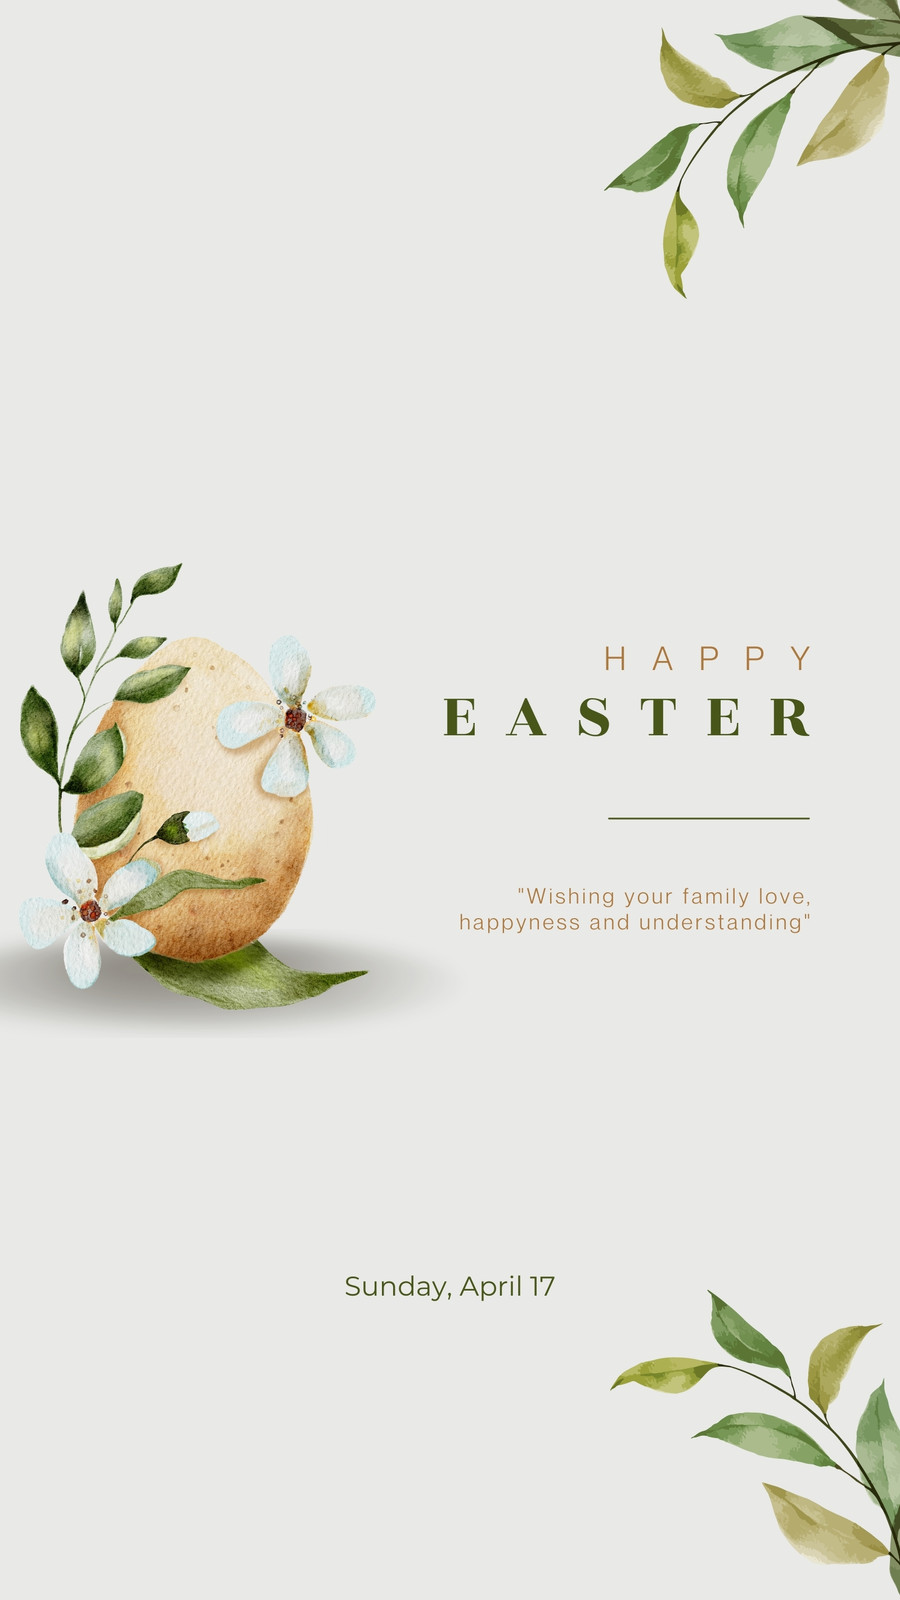 Free and customizable easter templates